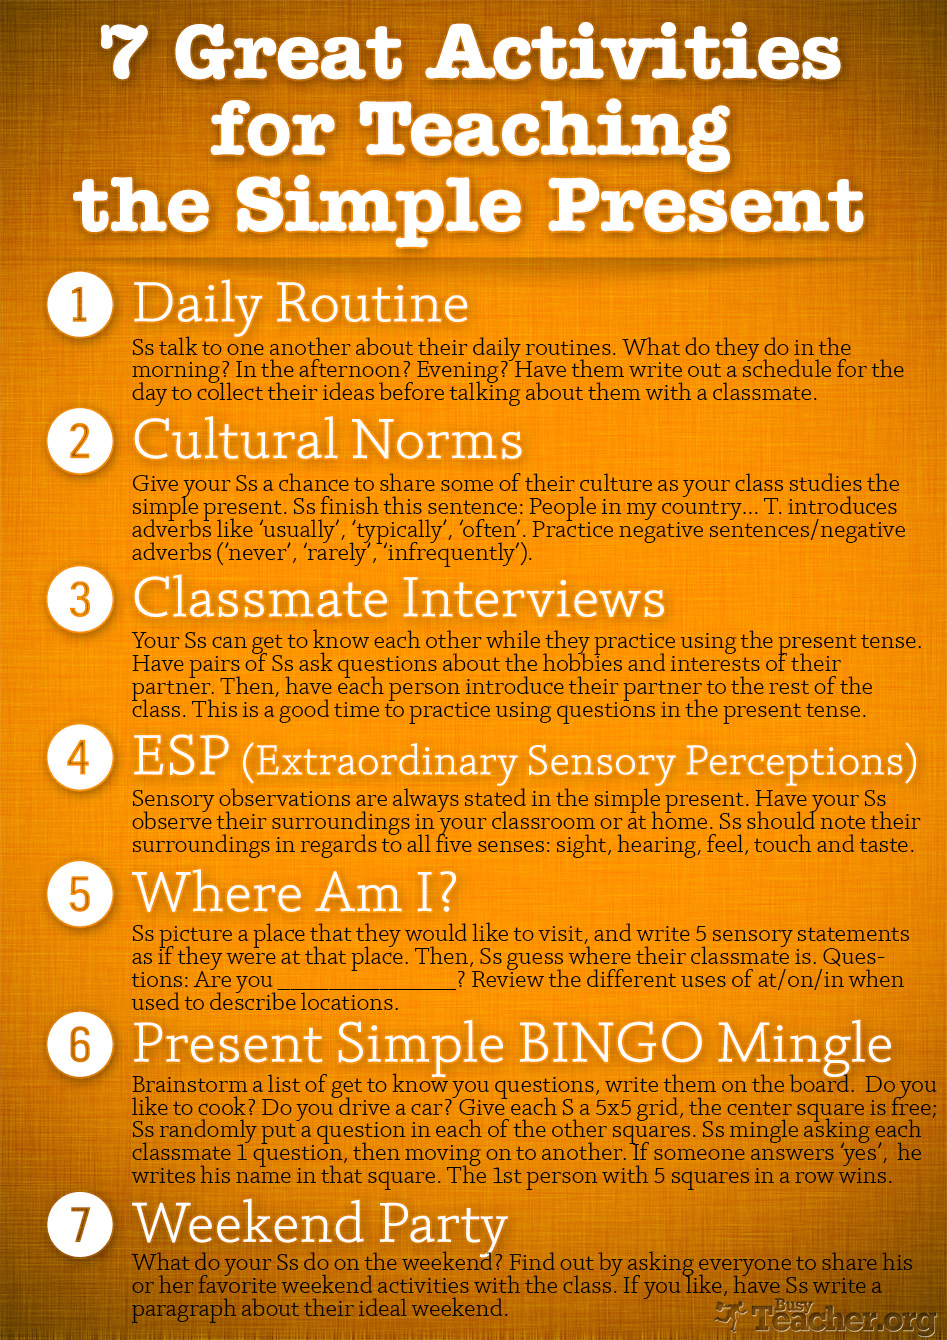 POSTER: 7 Great Activities to Teach the Simple Present